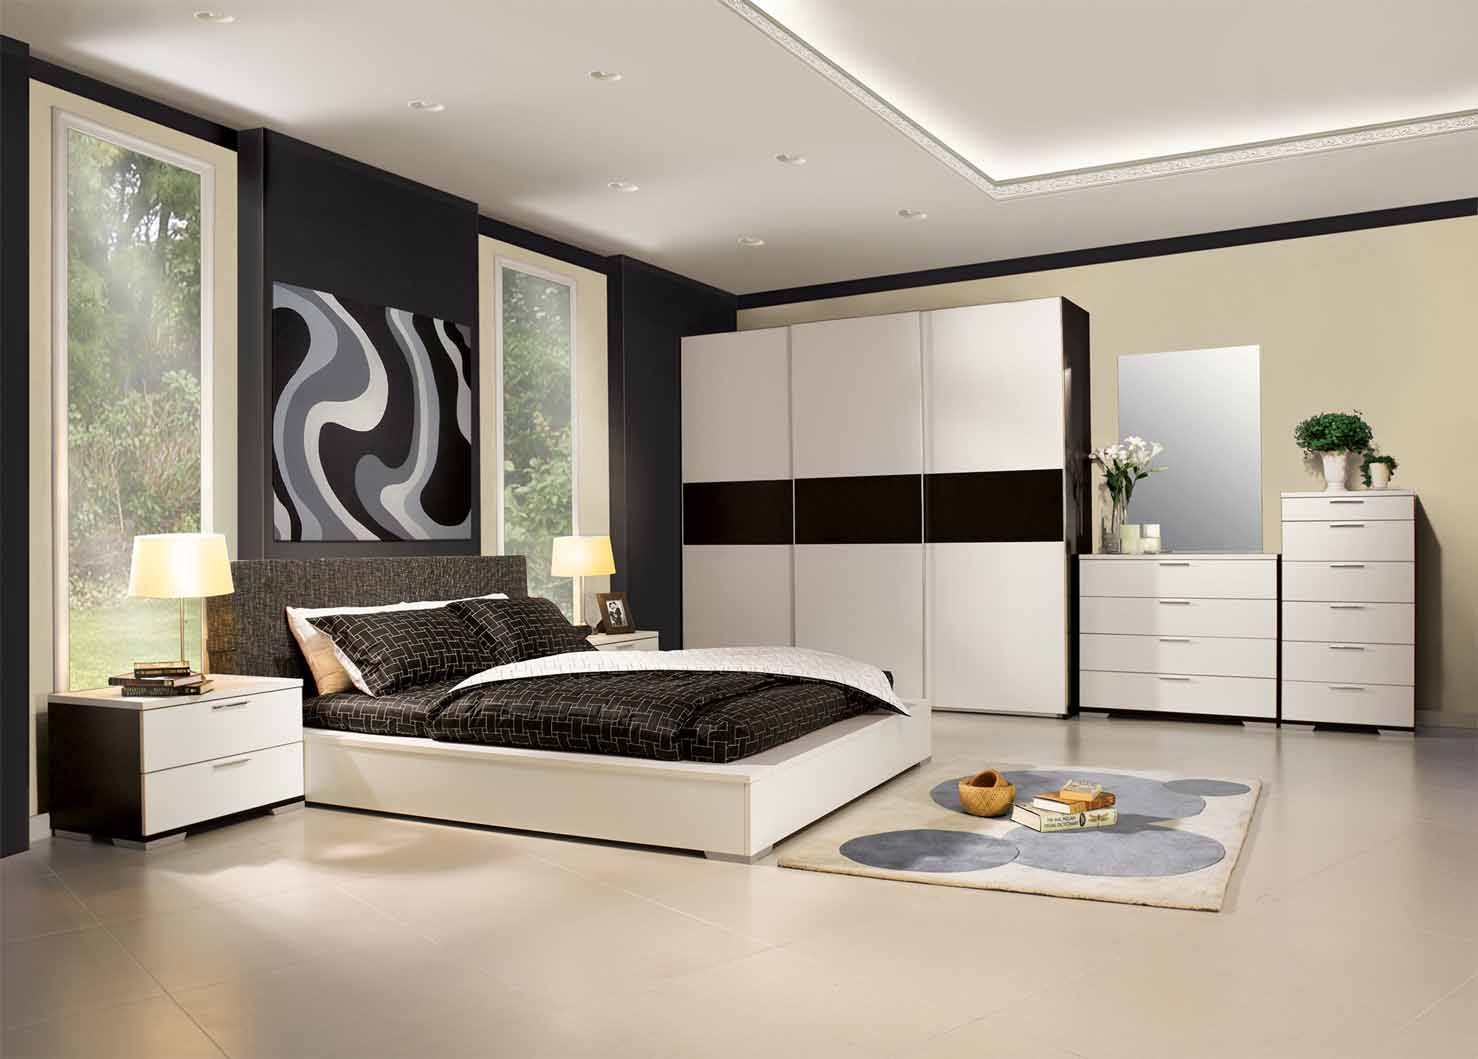 awesome Bedrooms ideas pictures 2014 Decorating Bedrooms 2014 ~ Room Design Ideas